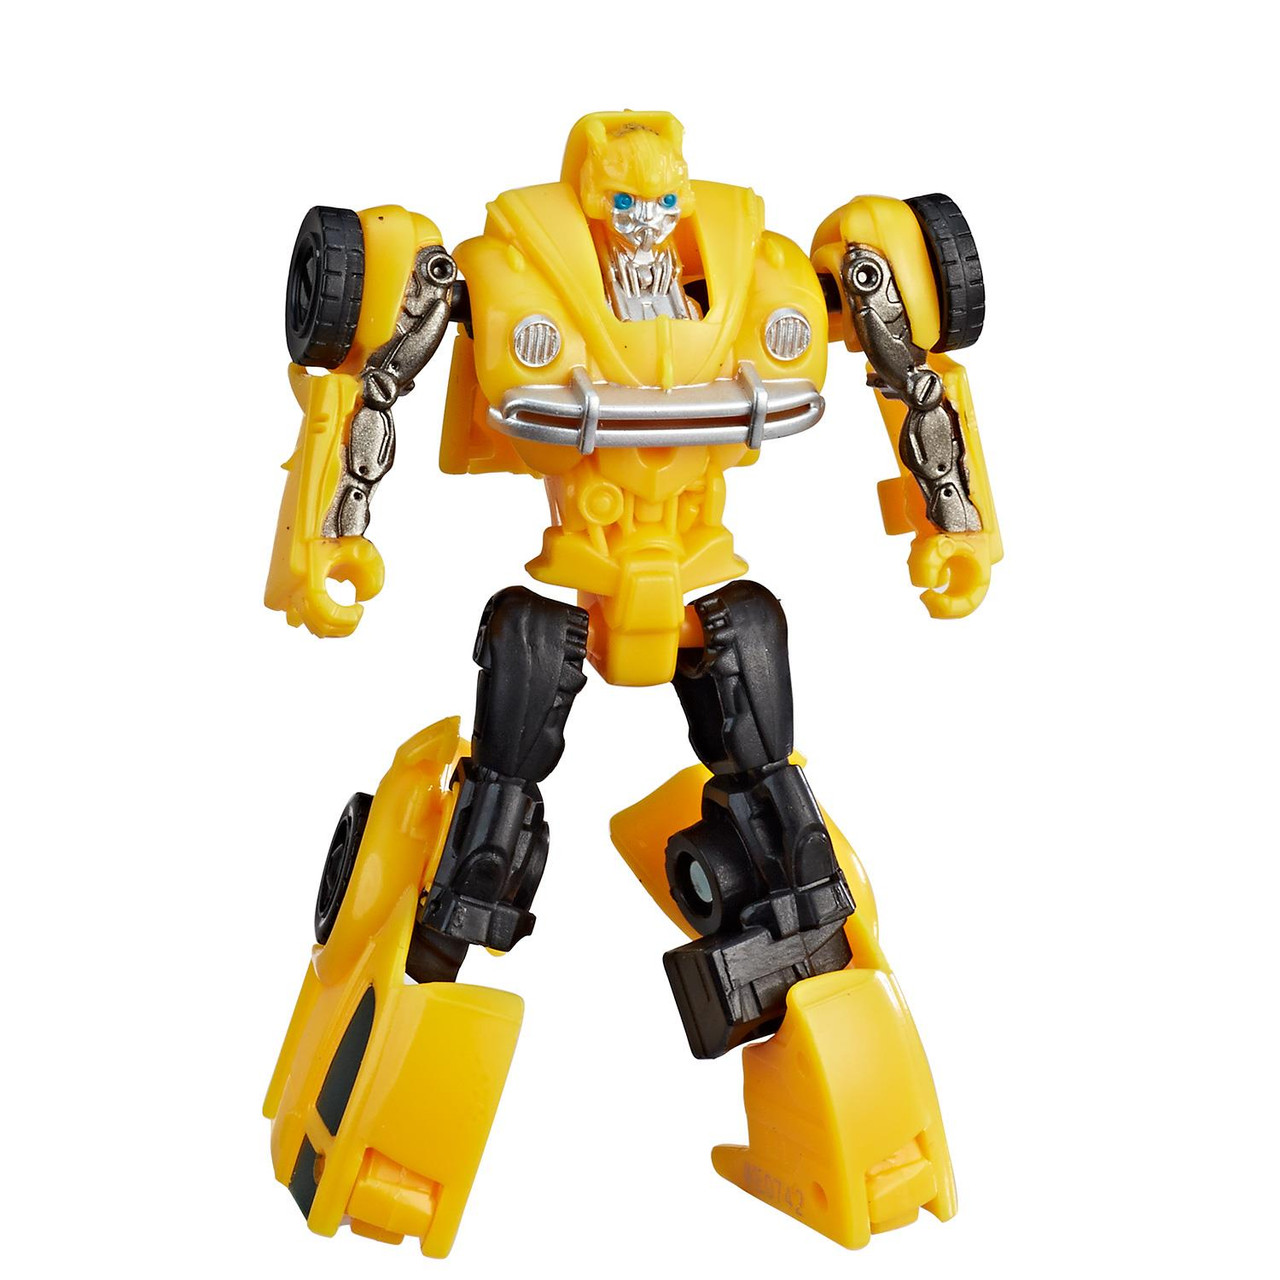 Transformers: Bumblebee Movie Toys, Energon Igniters Nitro Bumblebee Action  Figure - Included Core Powers Driving Action - Toys for Kids 6 & Up, 7